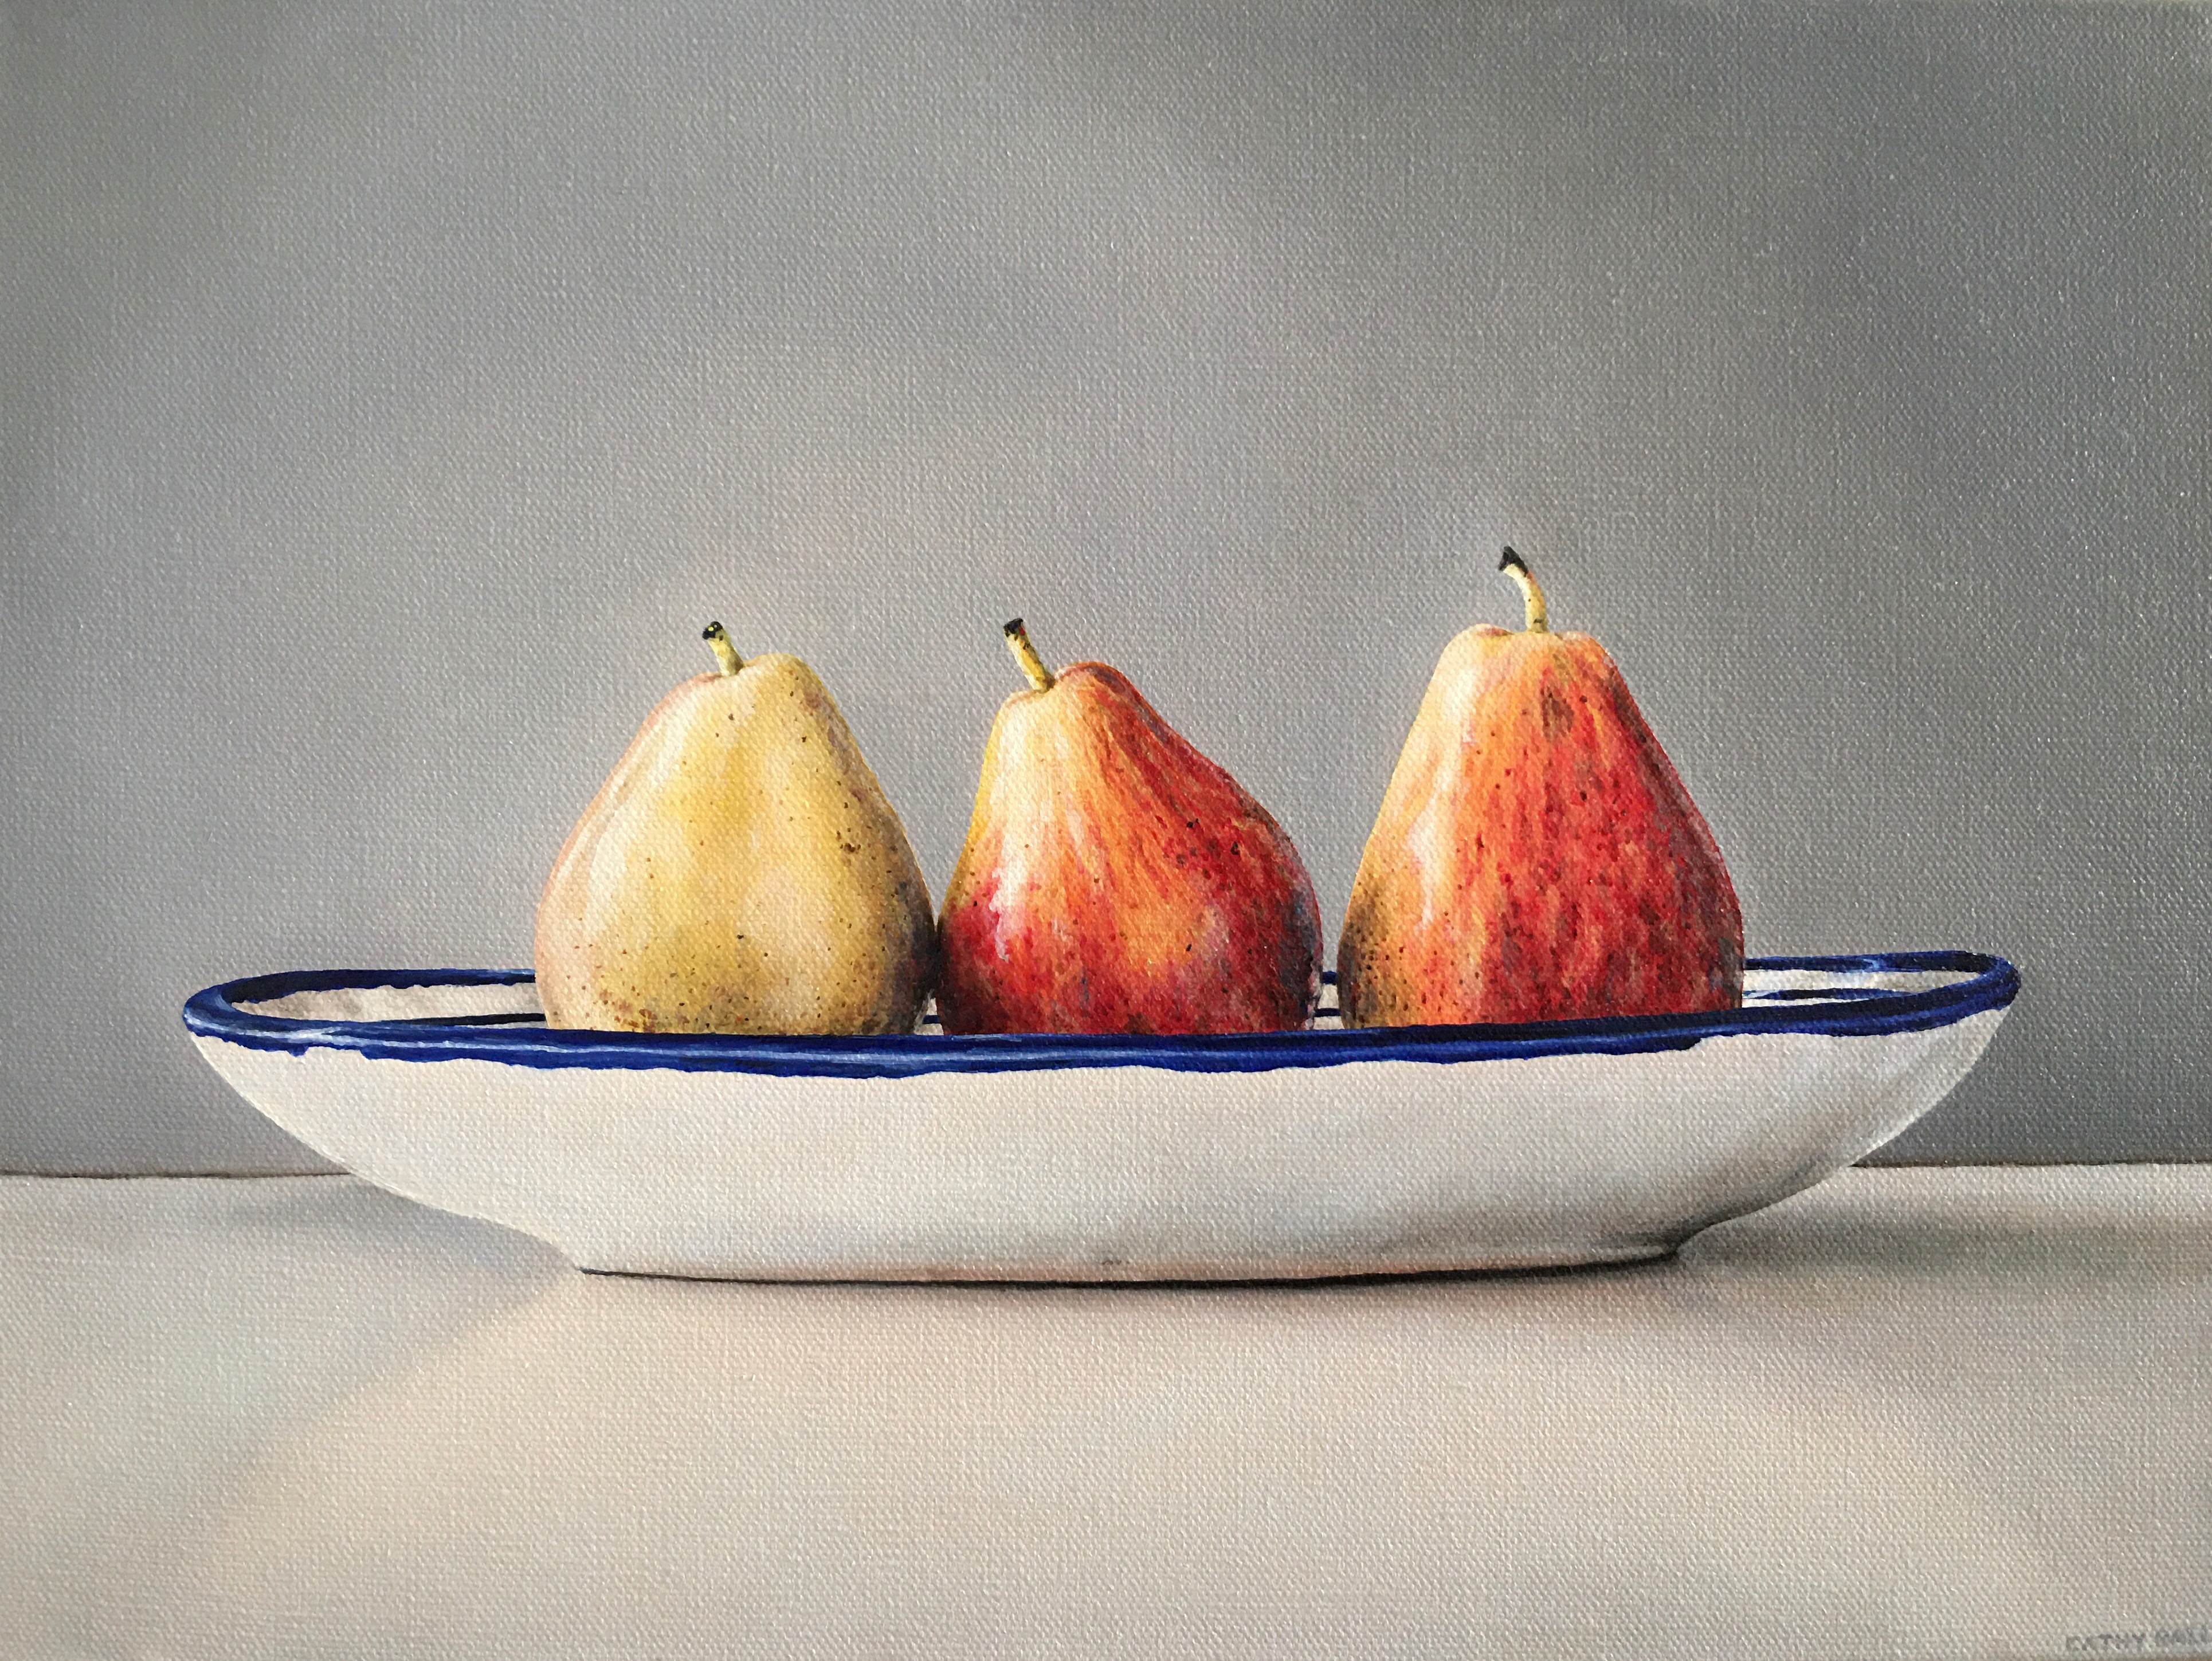 Three Pears in a Dish by Cathy Ball | Lethbridge 20000 2023 Finalists | Lethbridge Gallery